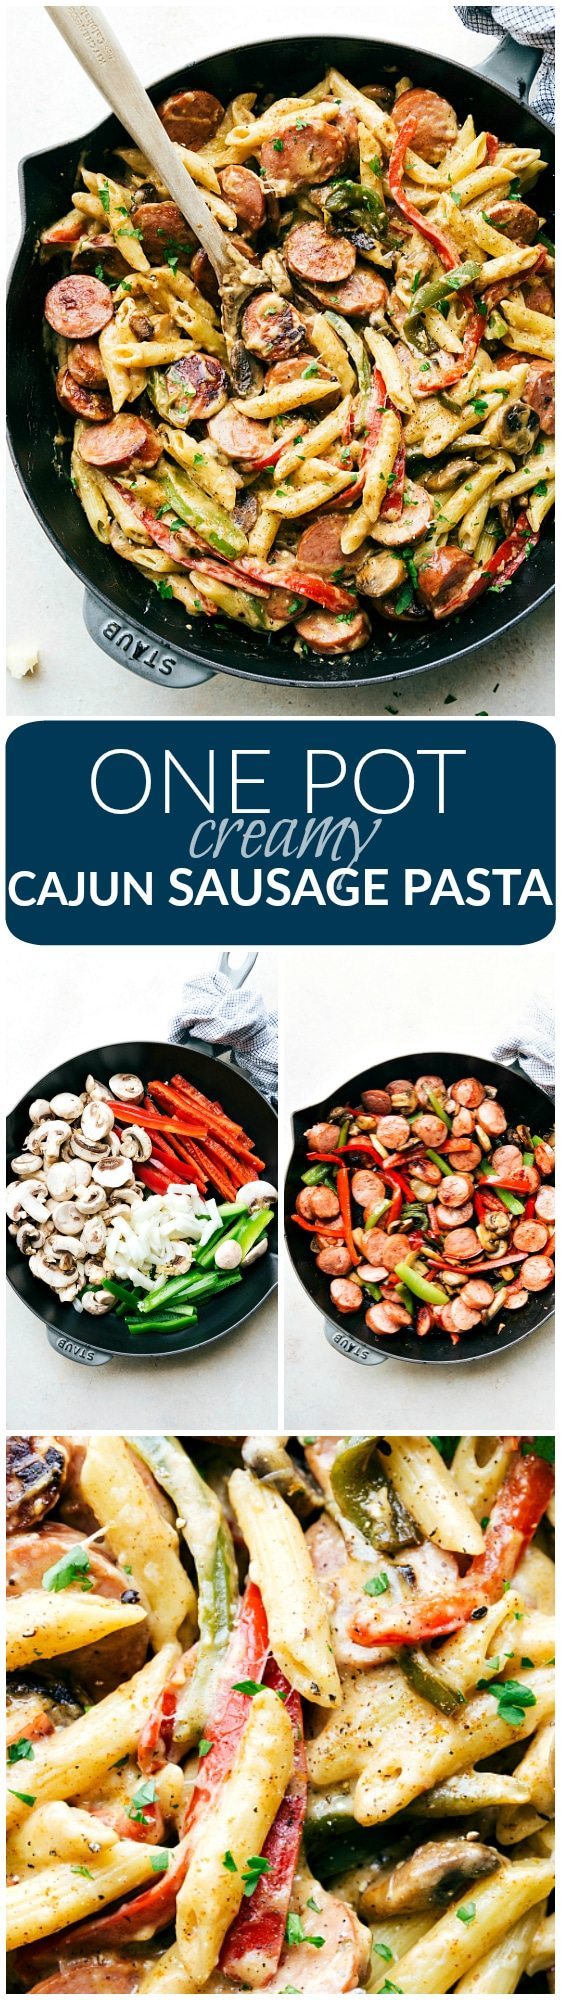 An easy one pot creamy cajun sausage and veggie pasta made healthier and a little lighter! via chelseasmessyapron.com